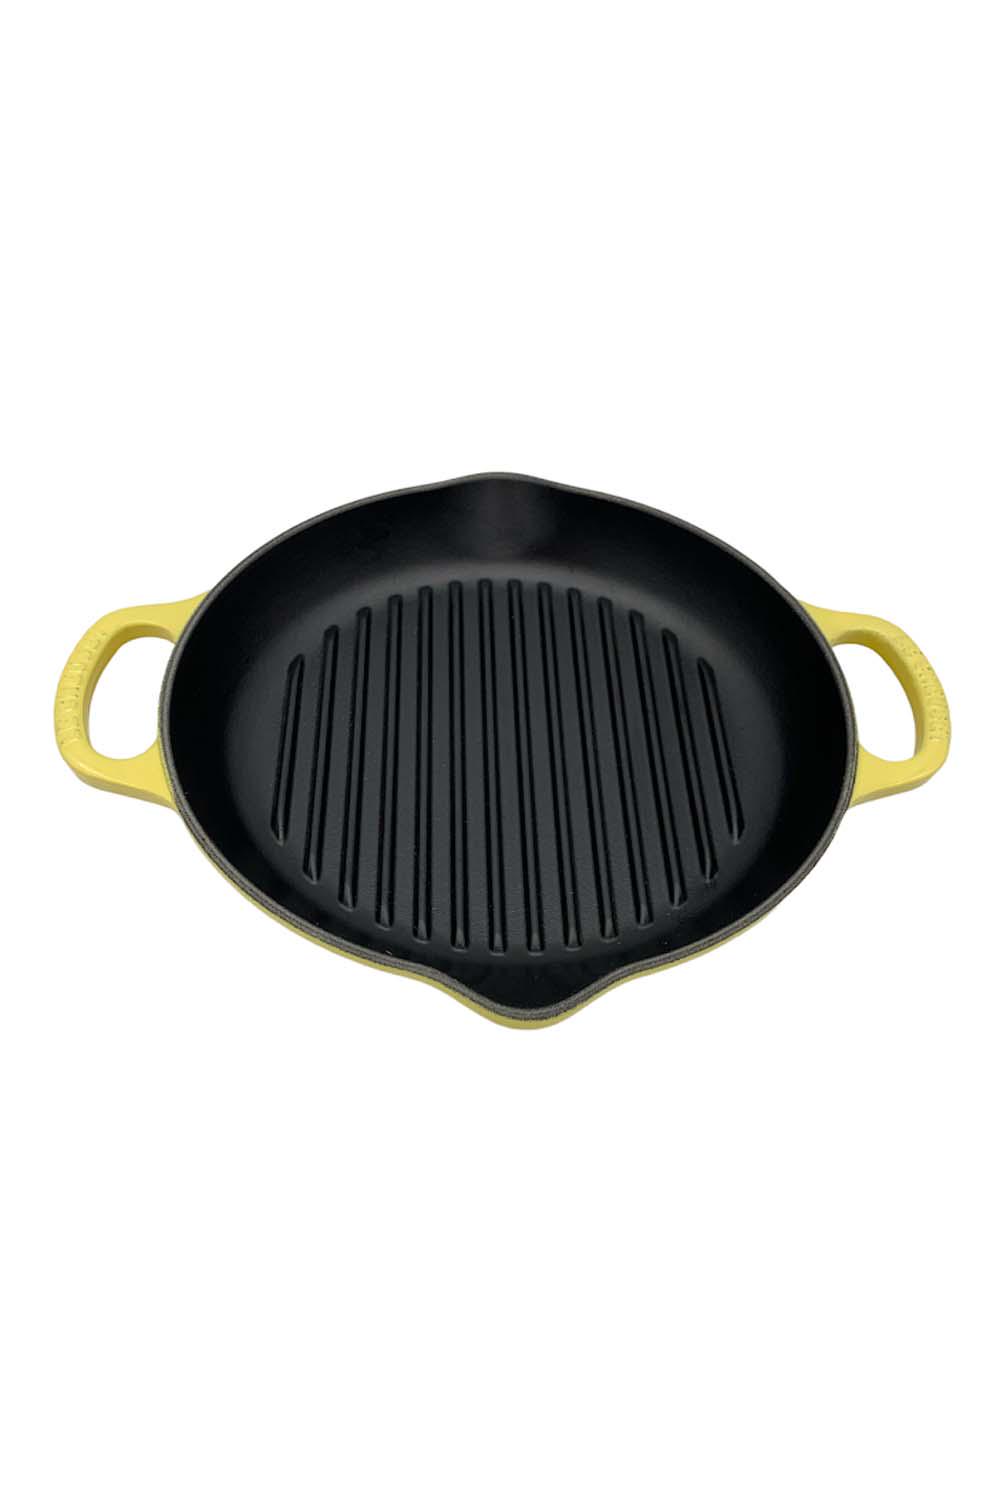 Vintage French Le Creuset Yellow Enameled Cast Iron Grill Pan